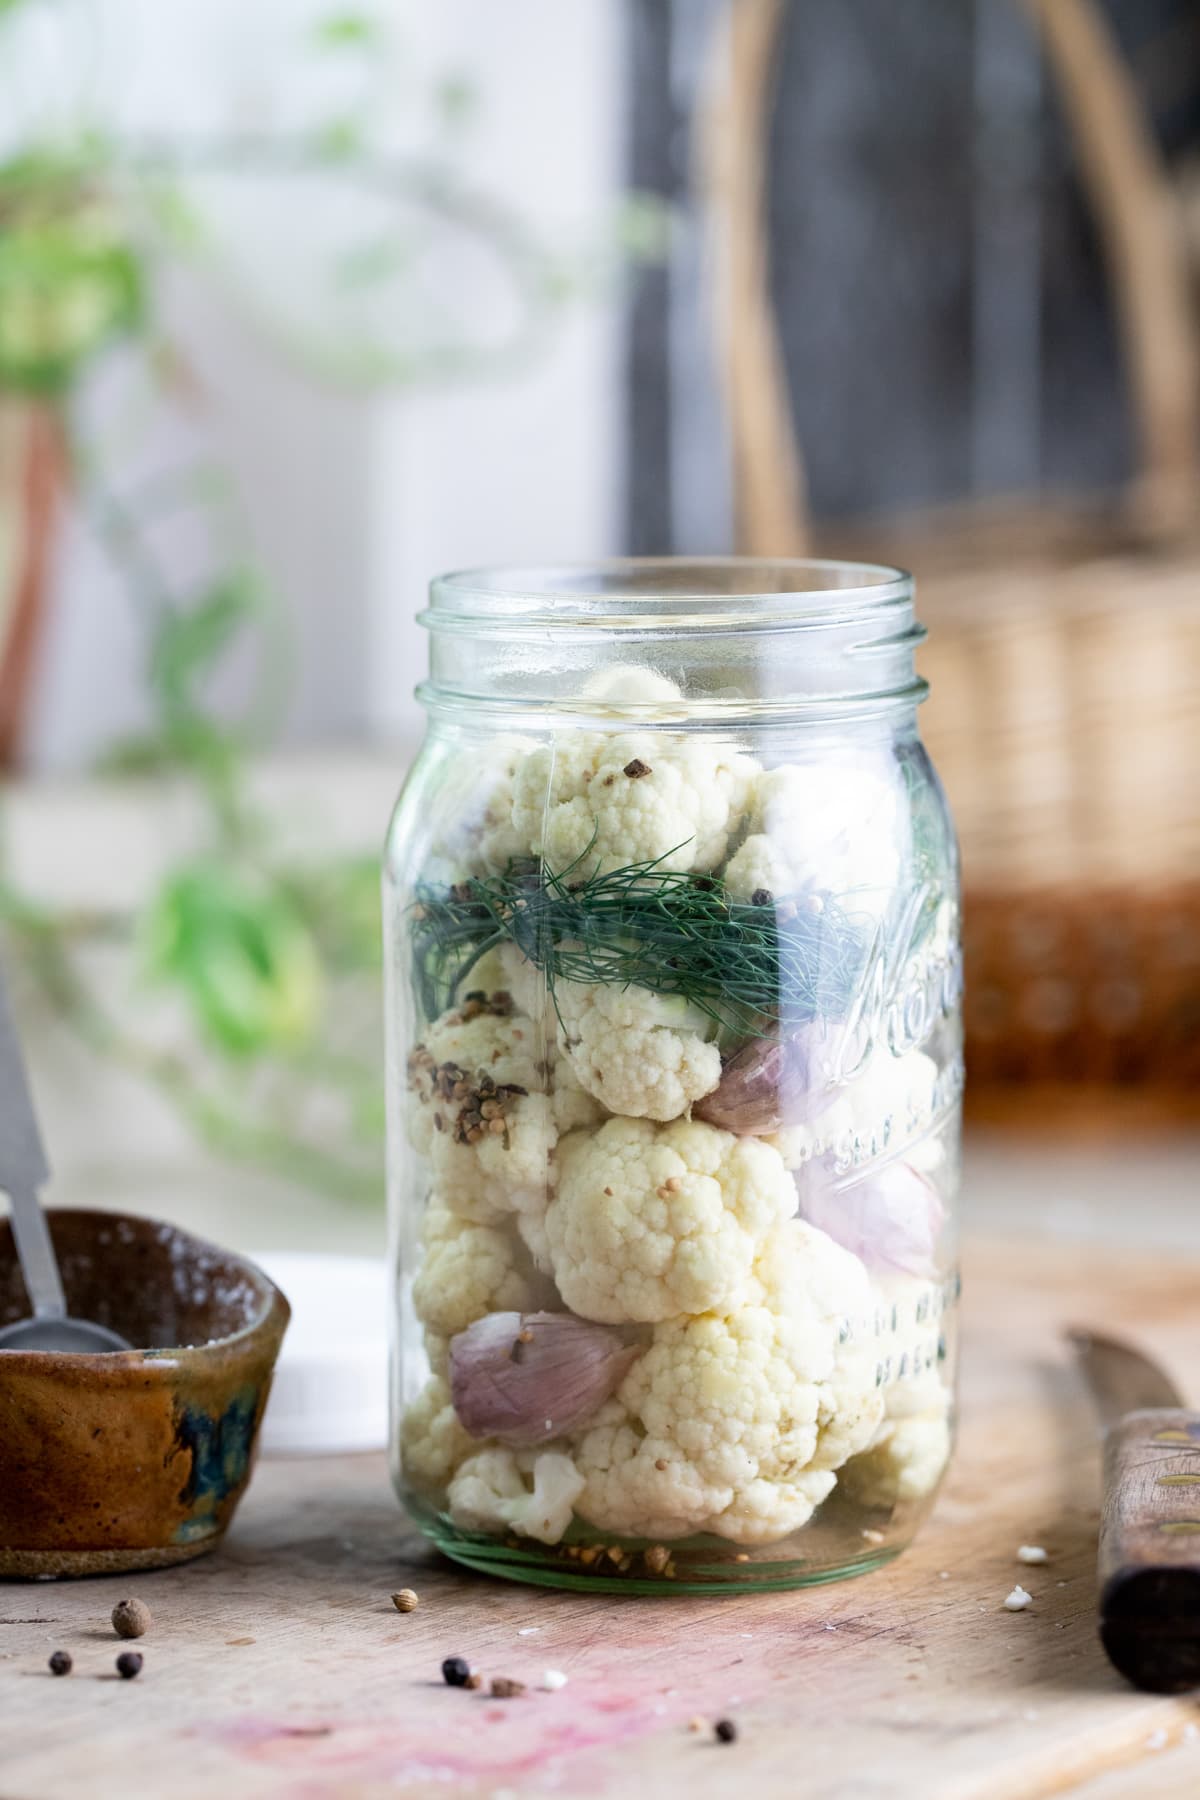 packing the jar with cauliflower and spices